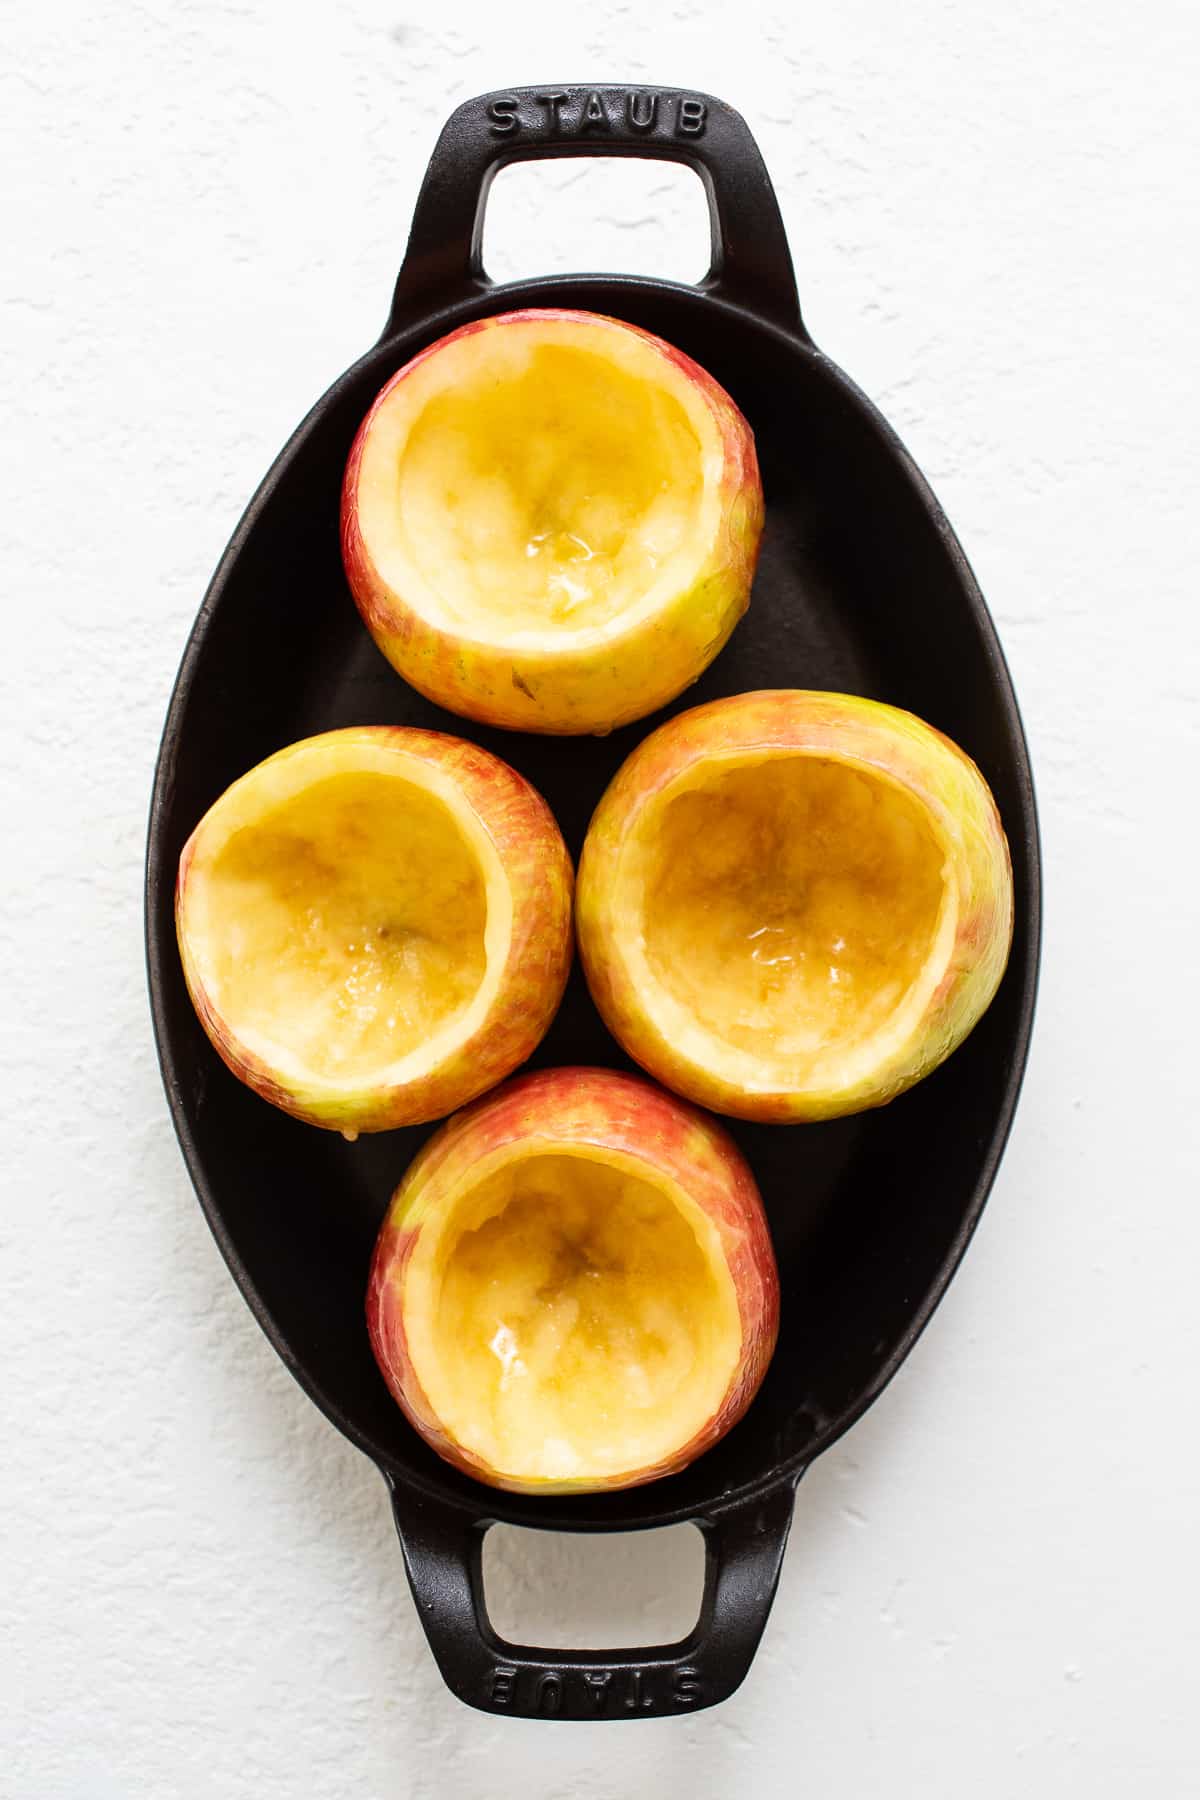 Cored apples in a baking dish.